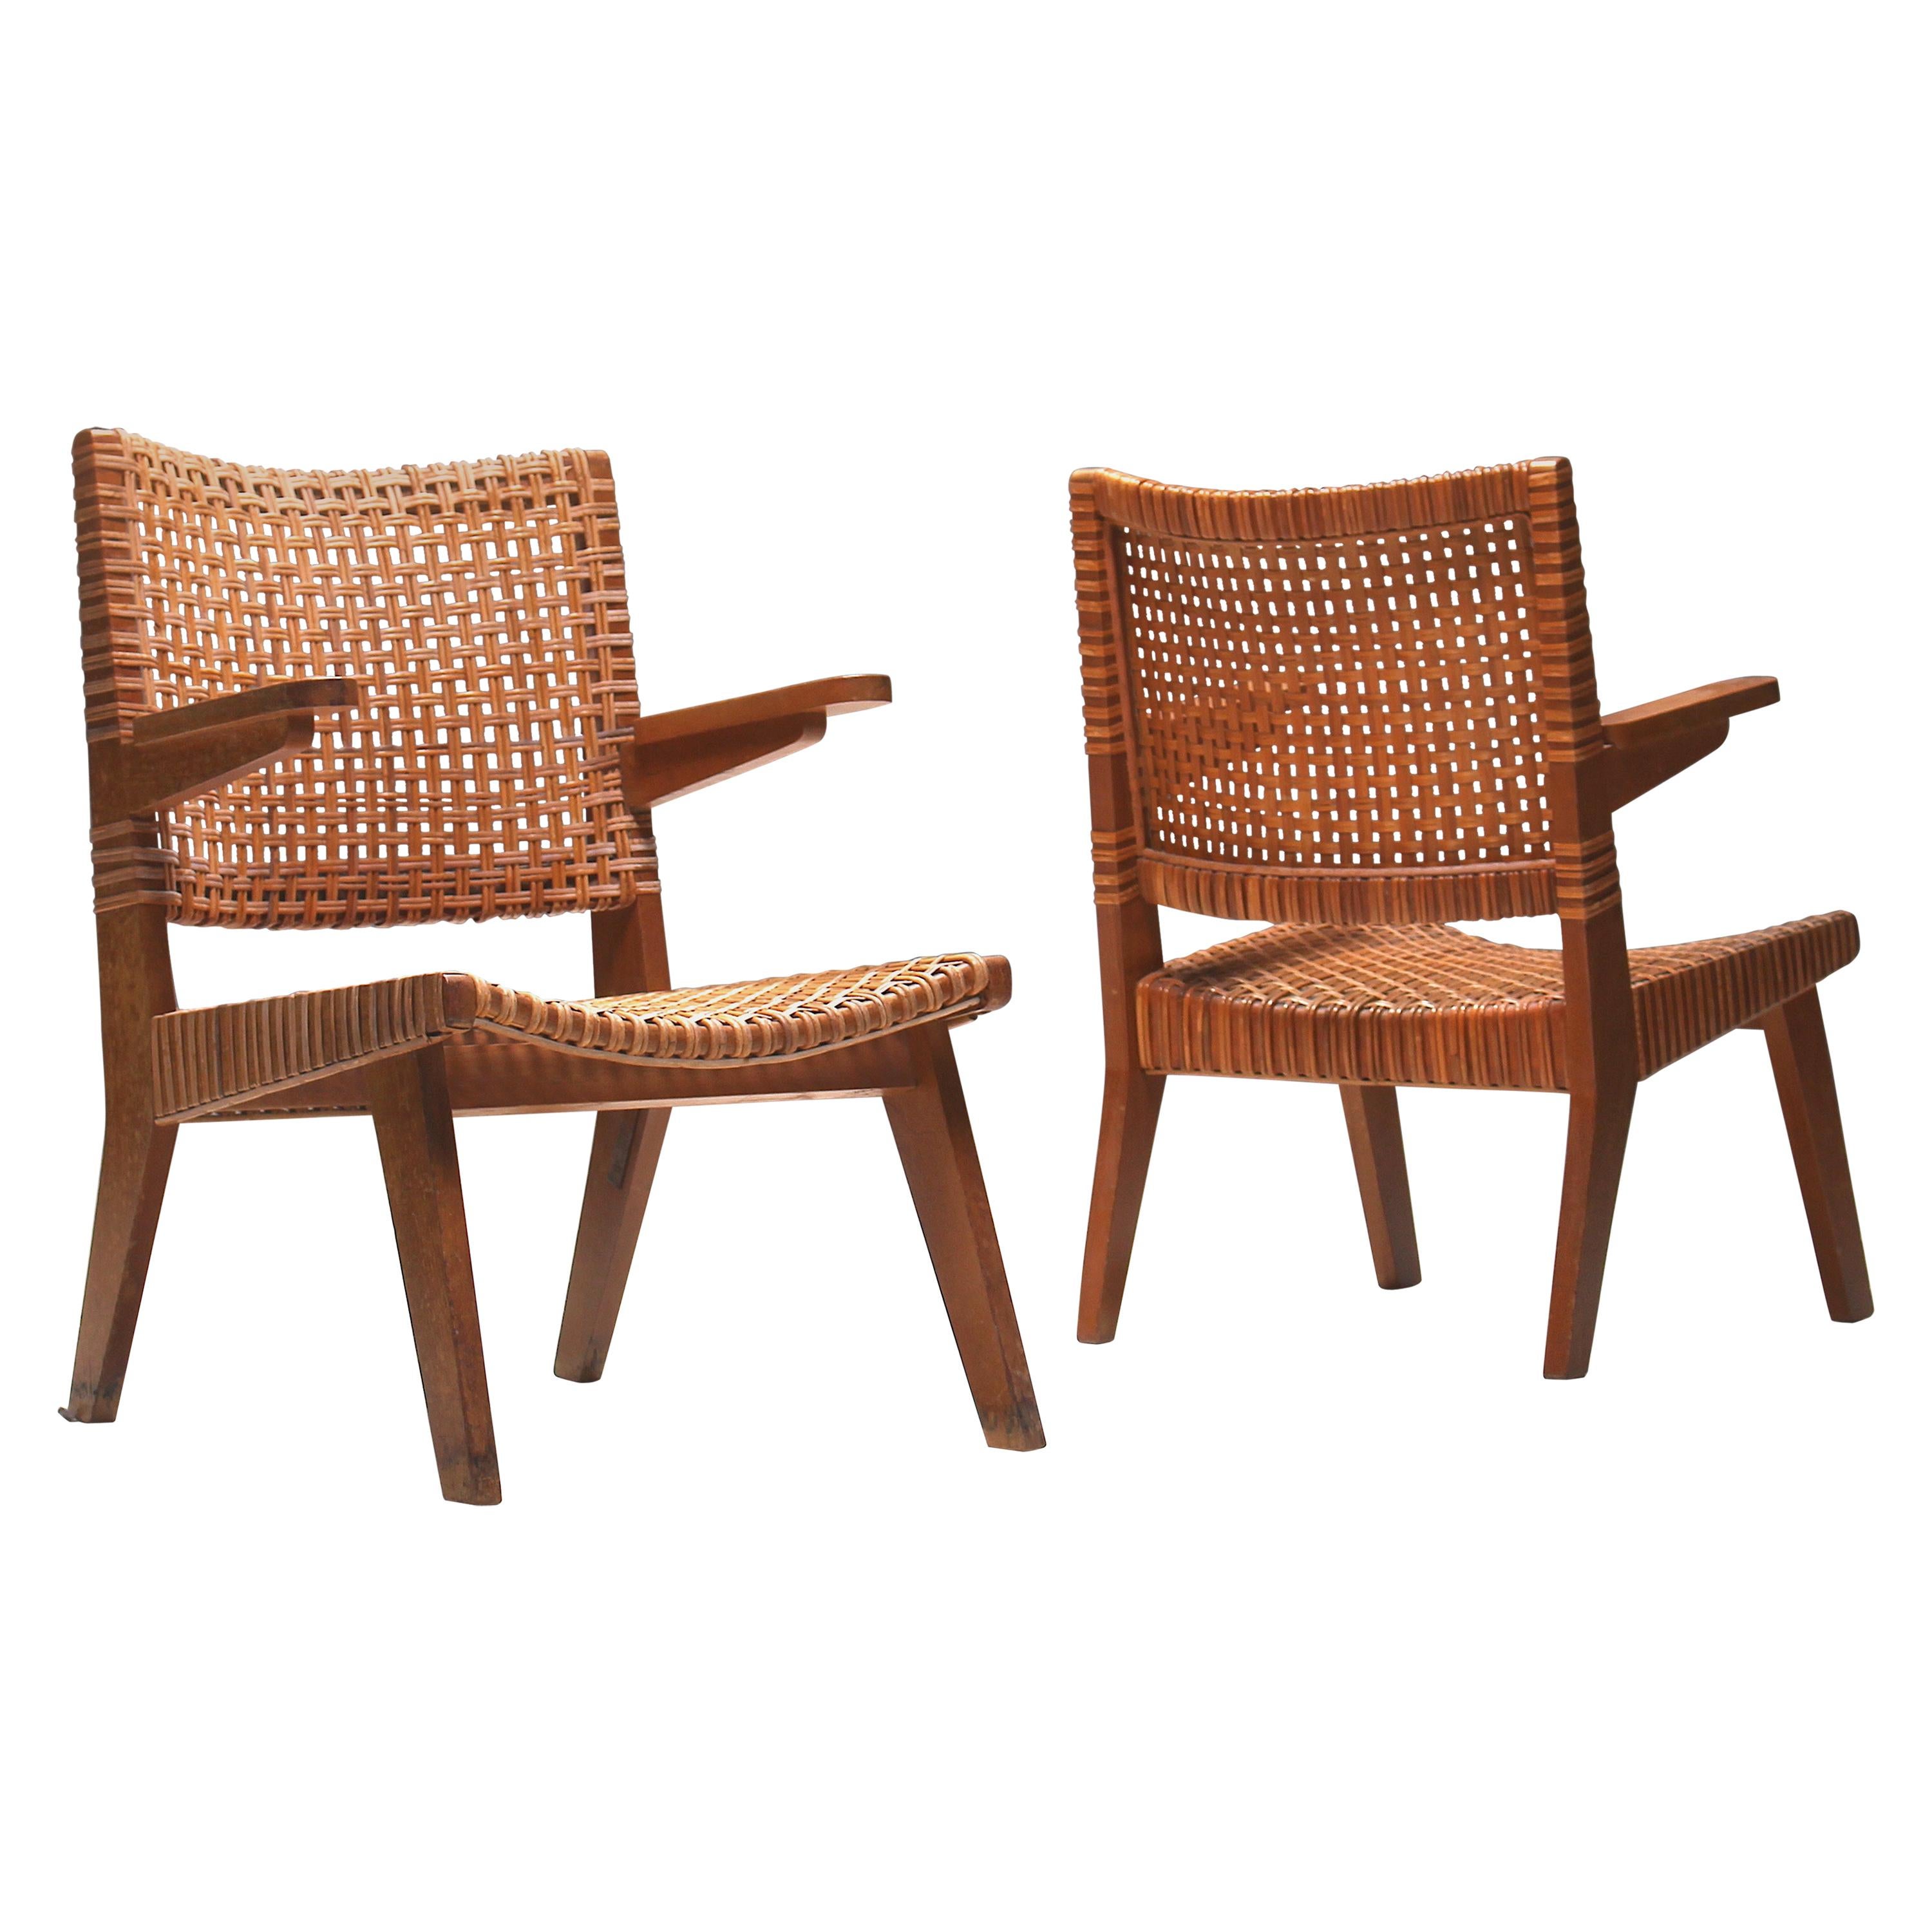 Pair of Large Armchairs by Pierre Jeanneret Geneva, Switzerland, 1950s For Sale